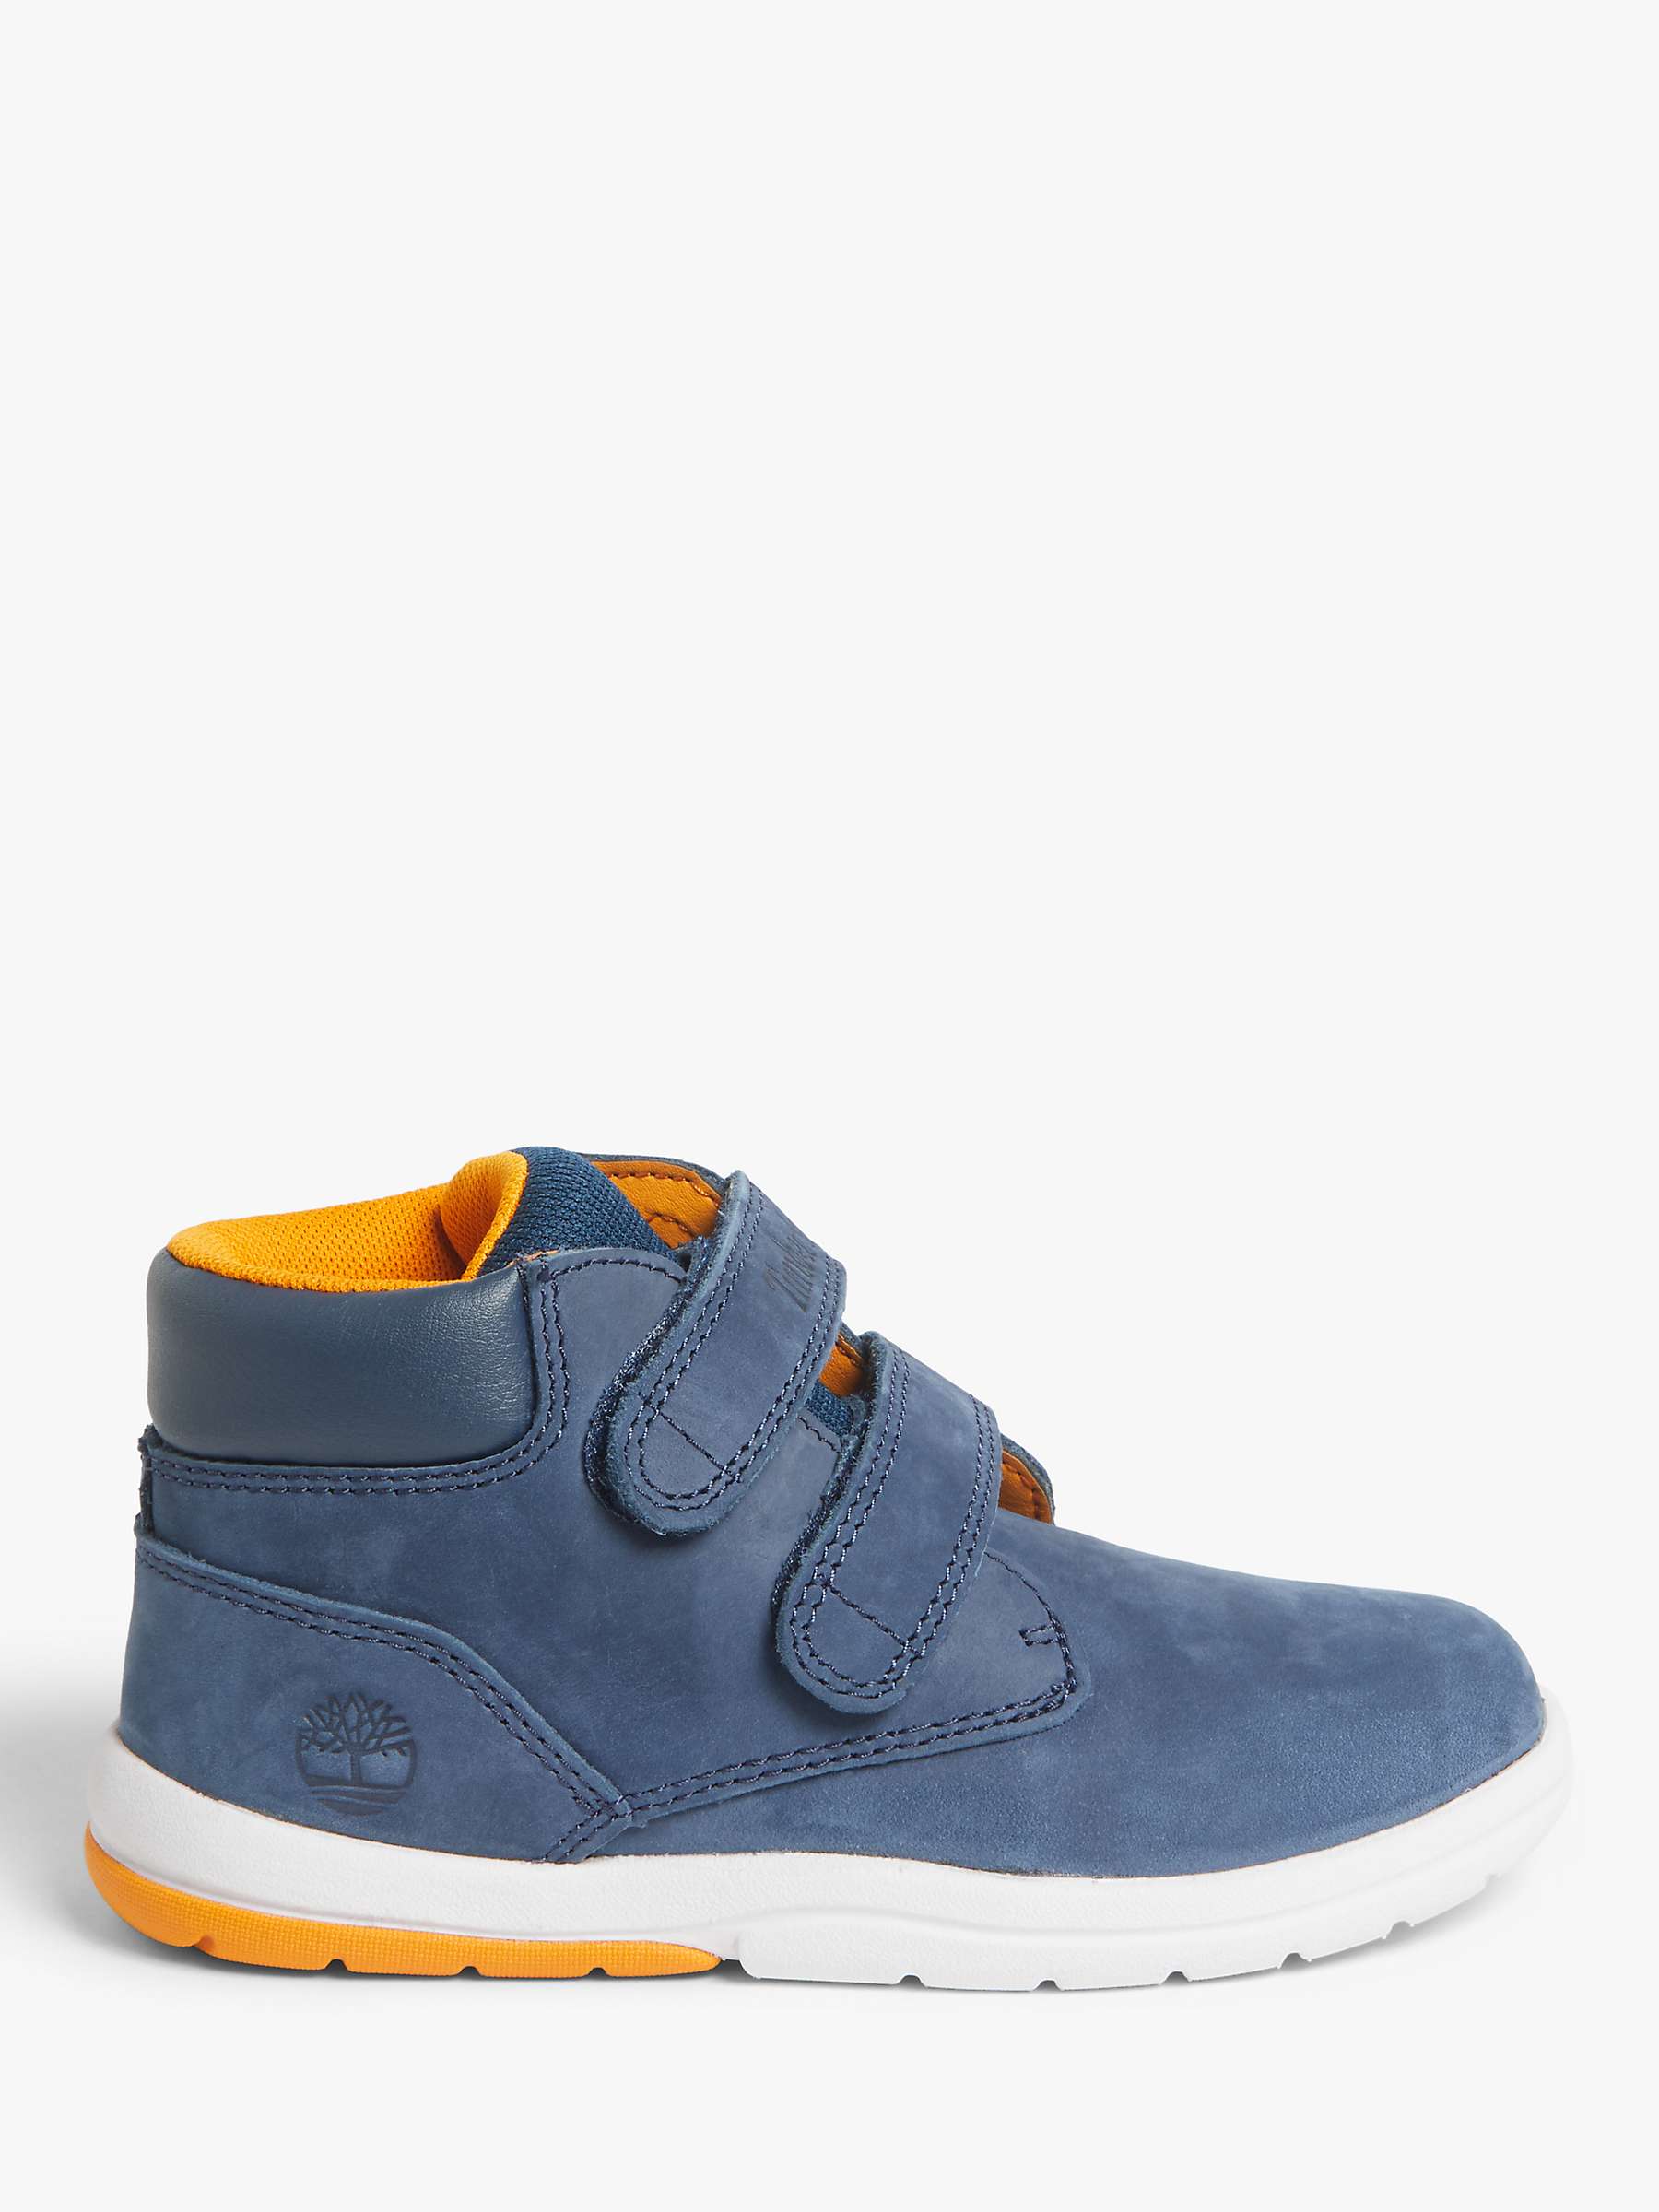 Buy Timberland Kids' Toddle Track Boots Online at johnlewis.com